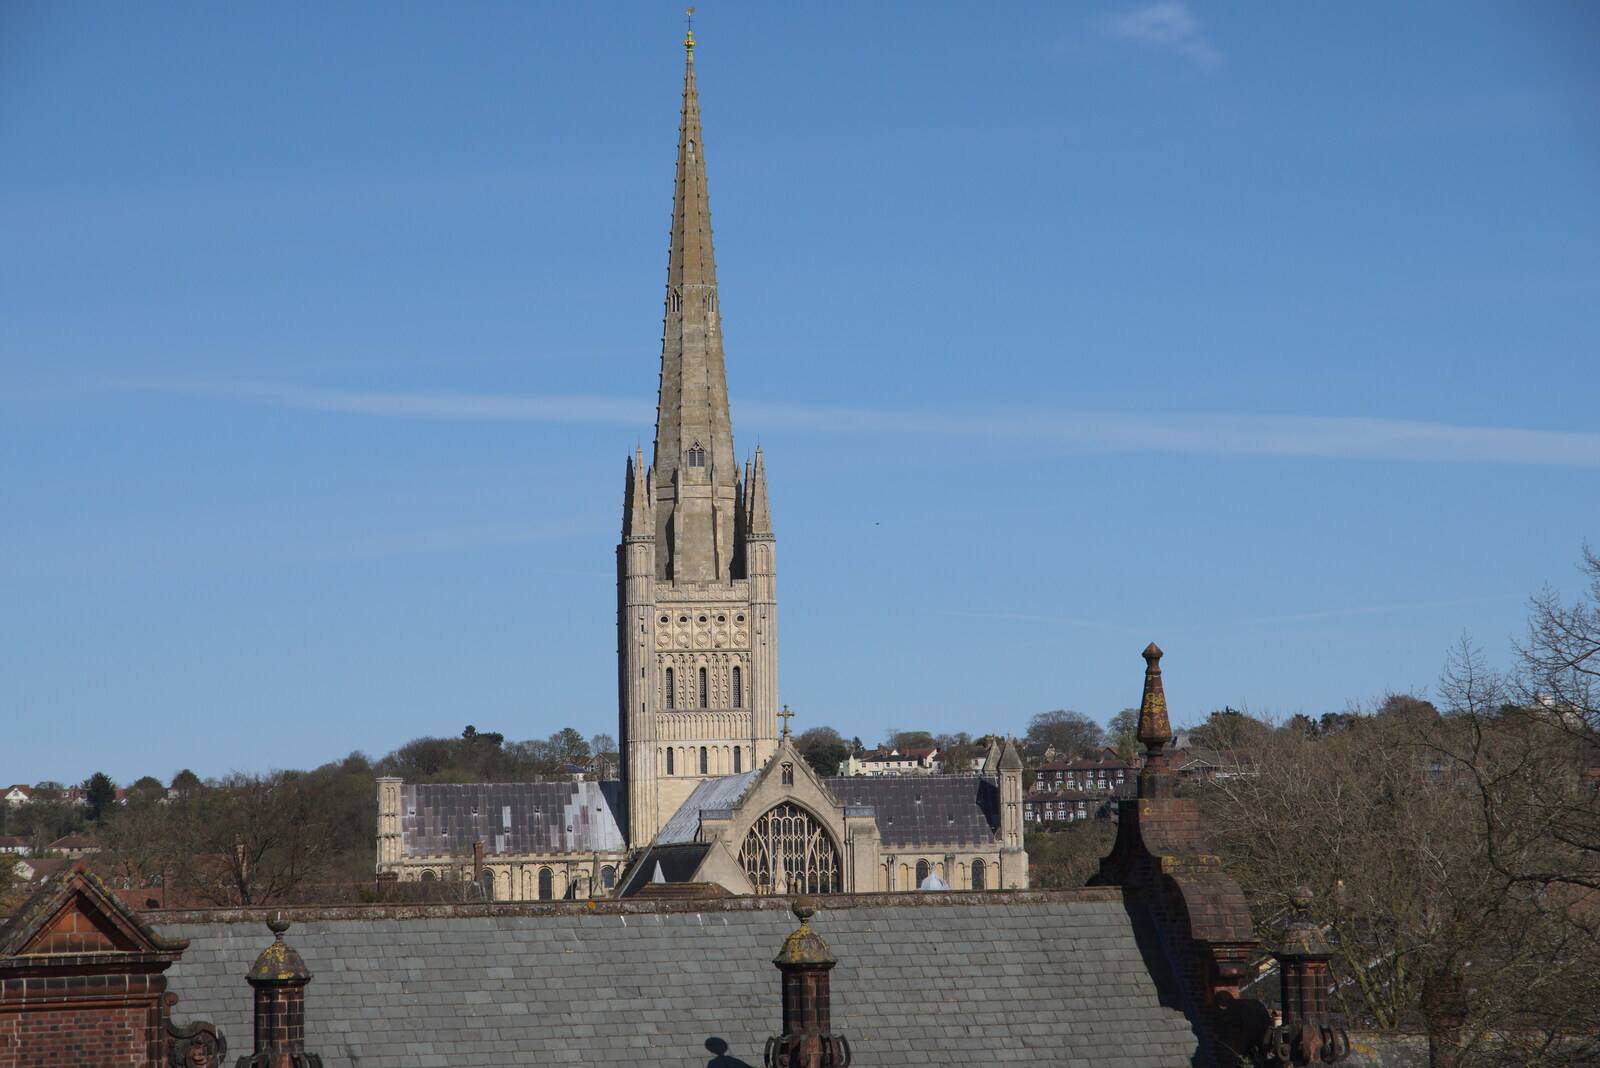 A view of Norwich Cathedral from The Death of Debenhams, Rampant Horse Street, Norwich, Norfolk - 17th April 2021